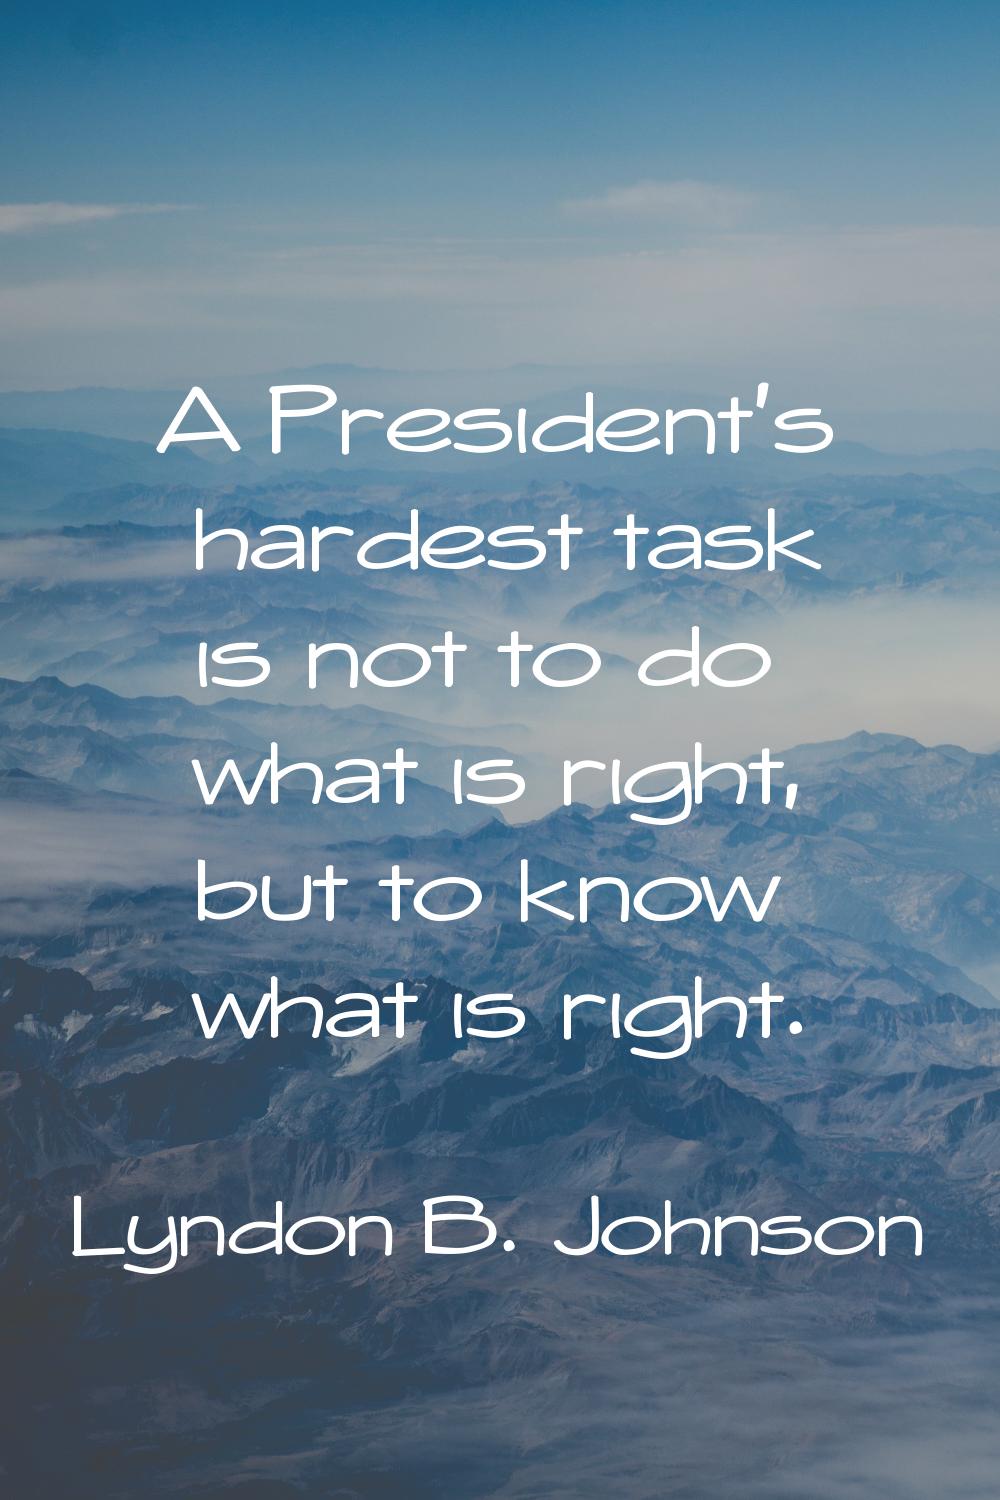 A President's hardest task is not to do what is right, but to know what is right.